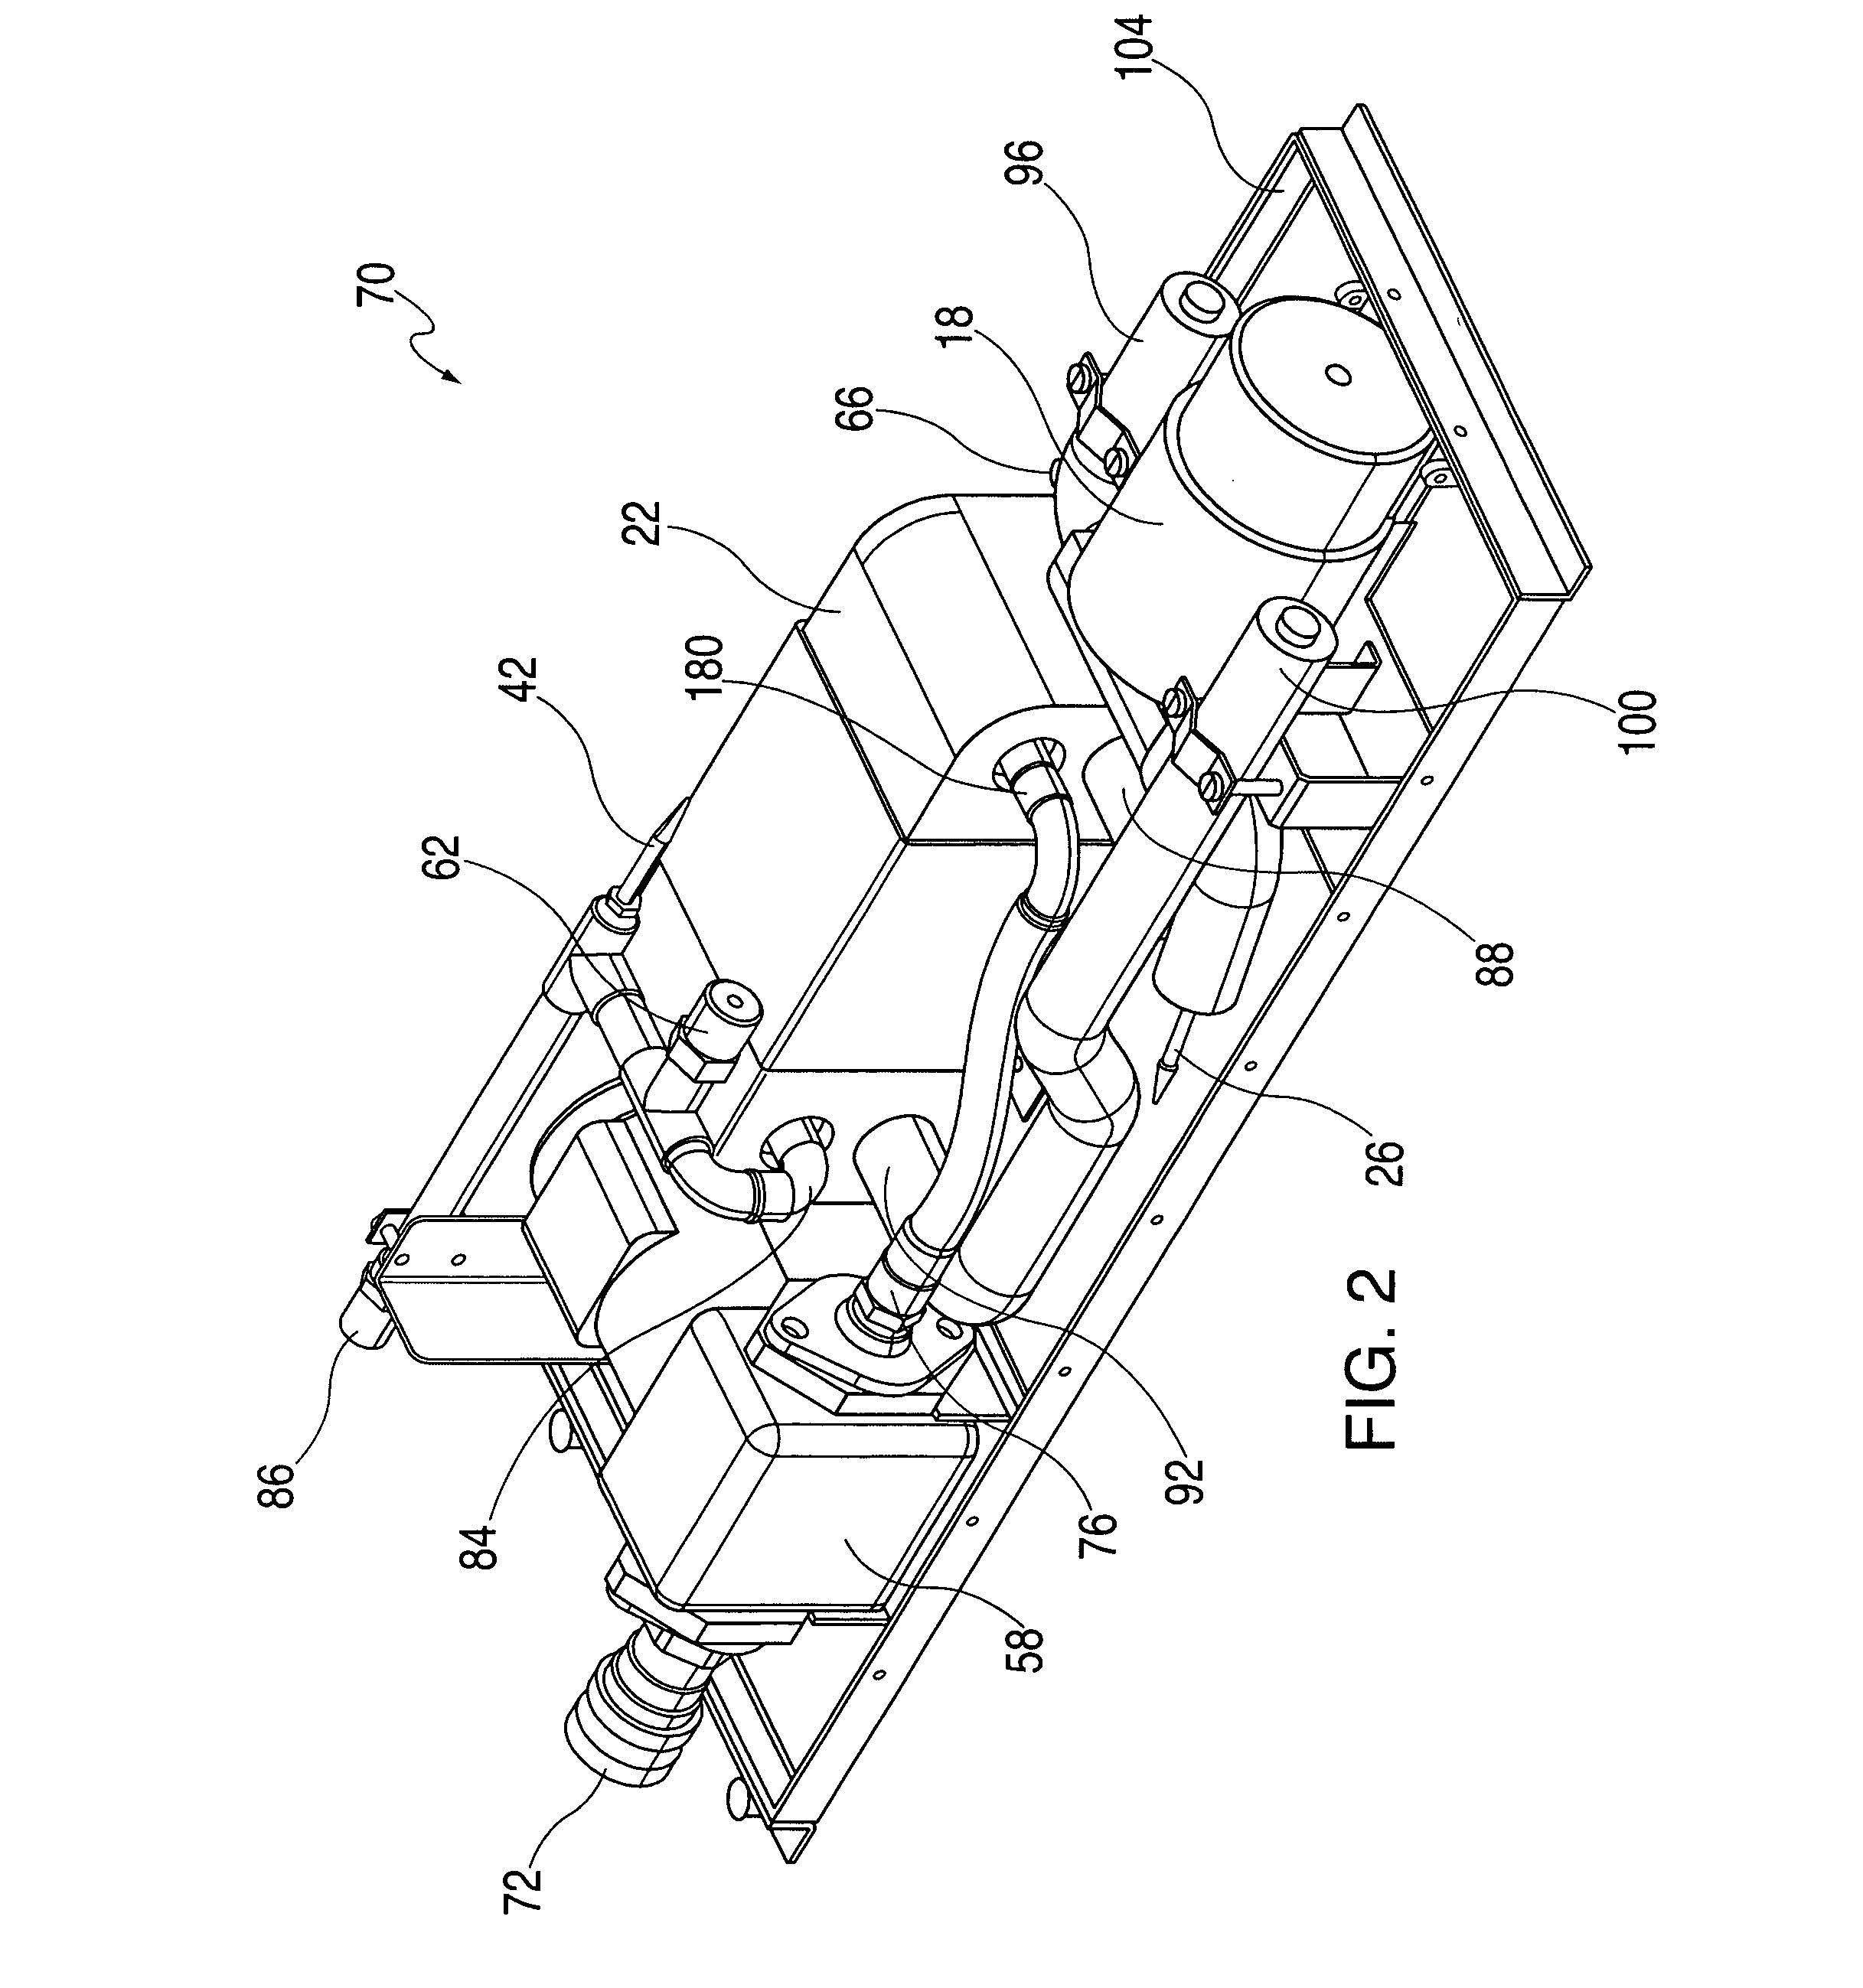 Method and apparatus for cooling electronic components